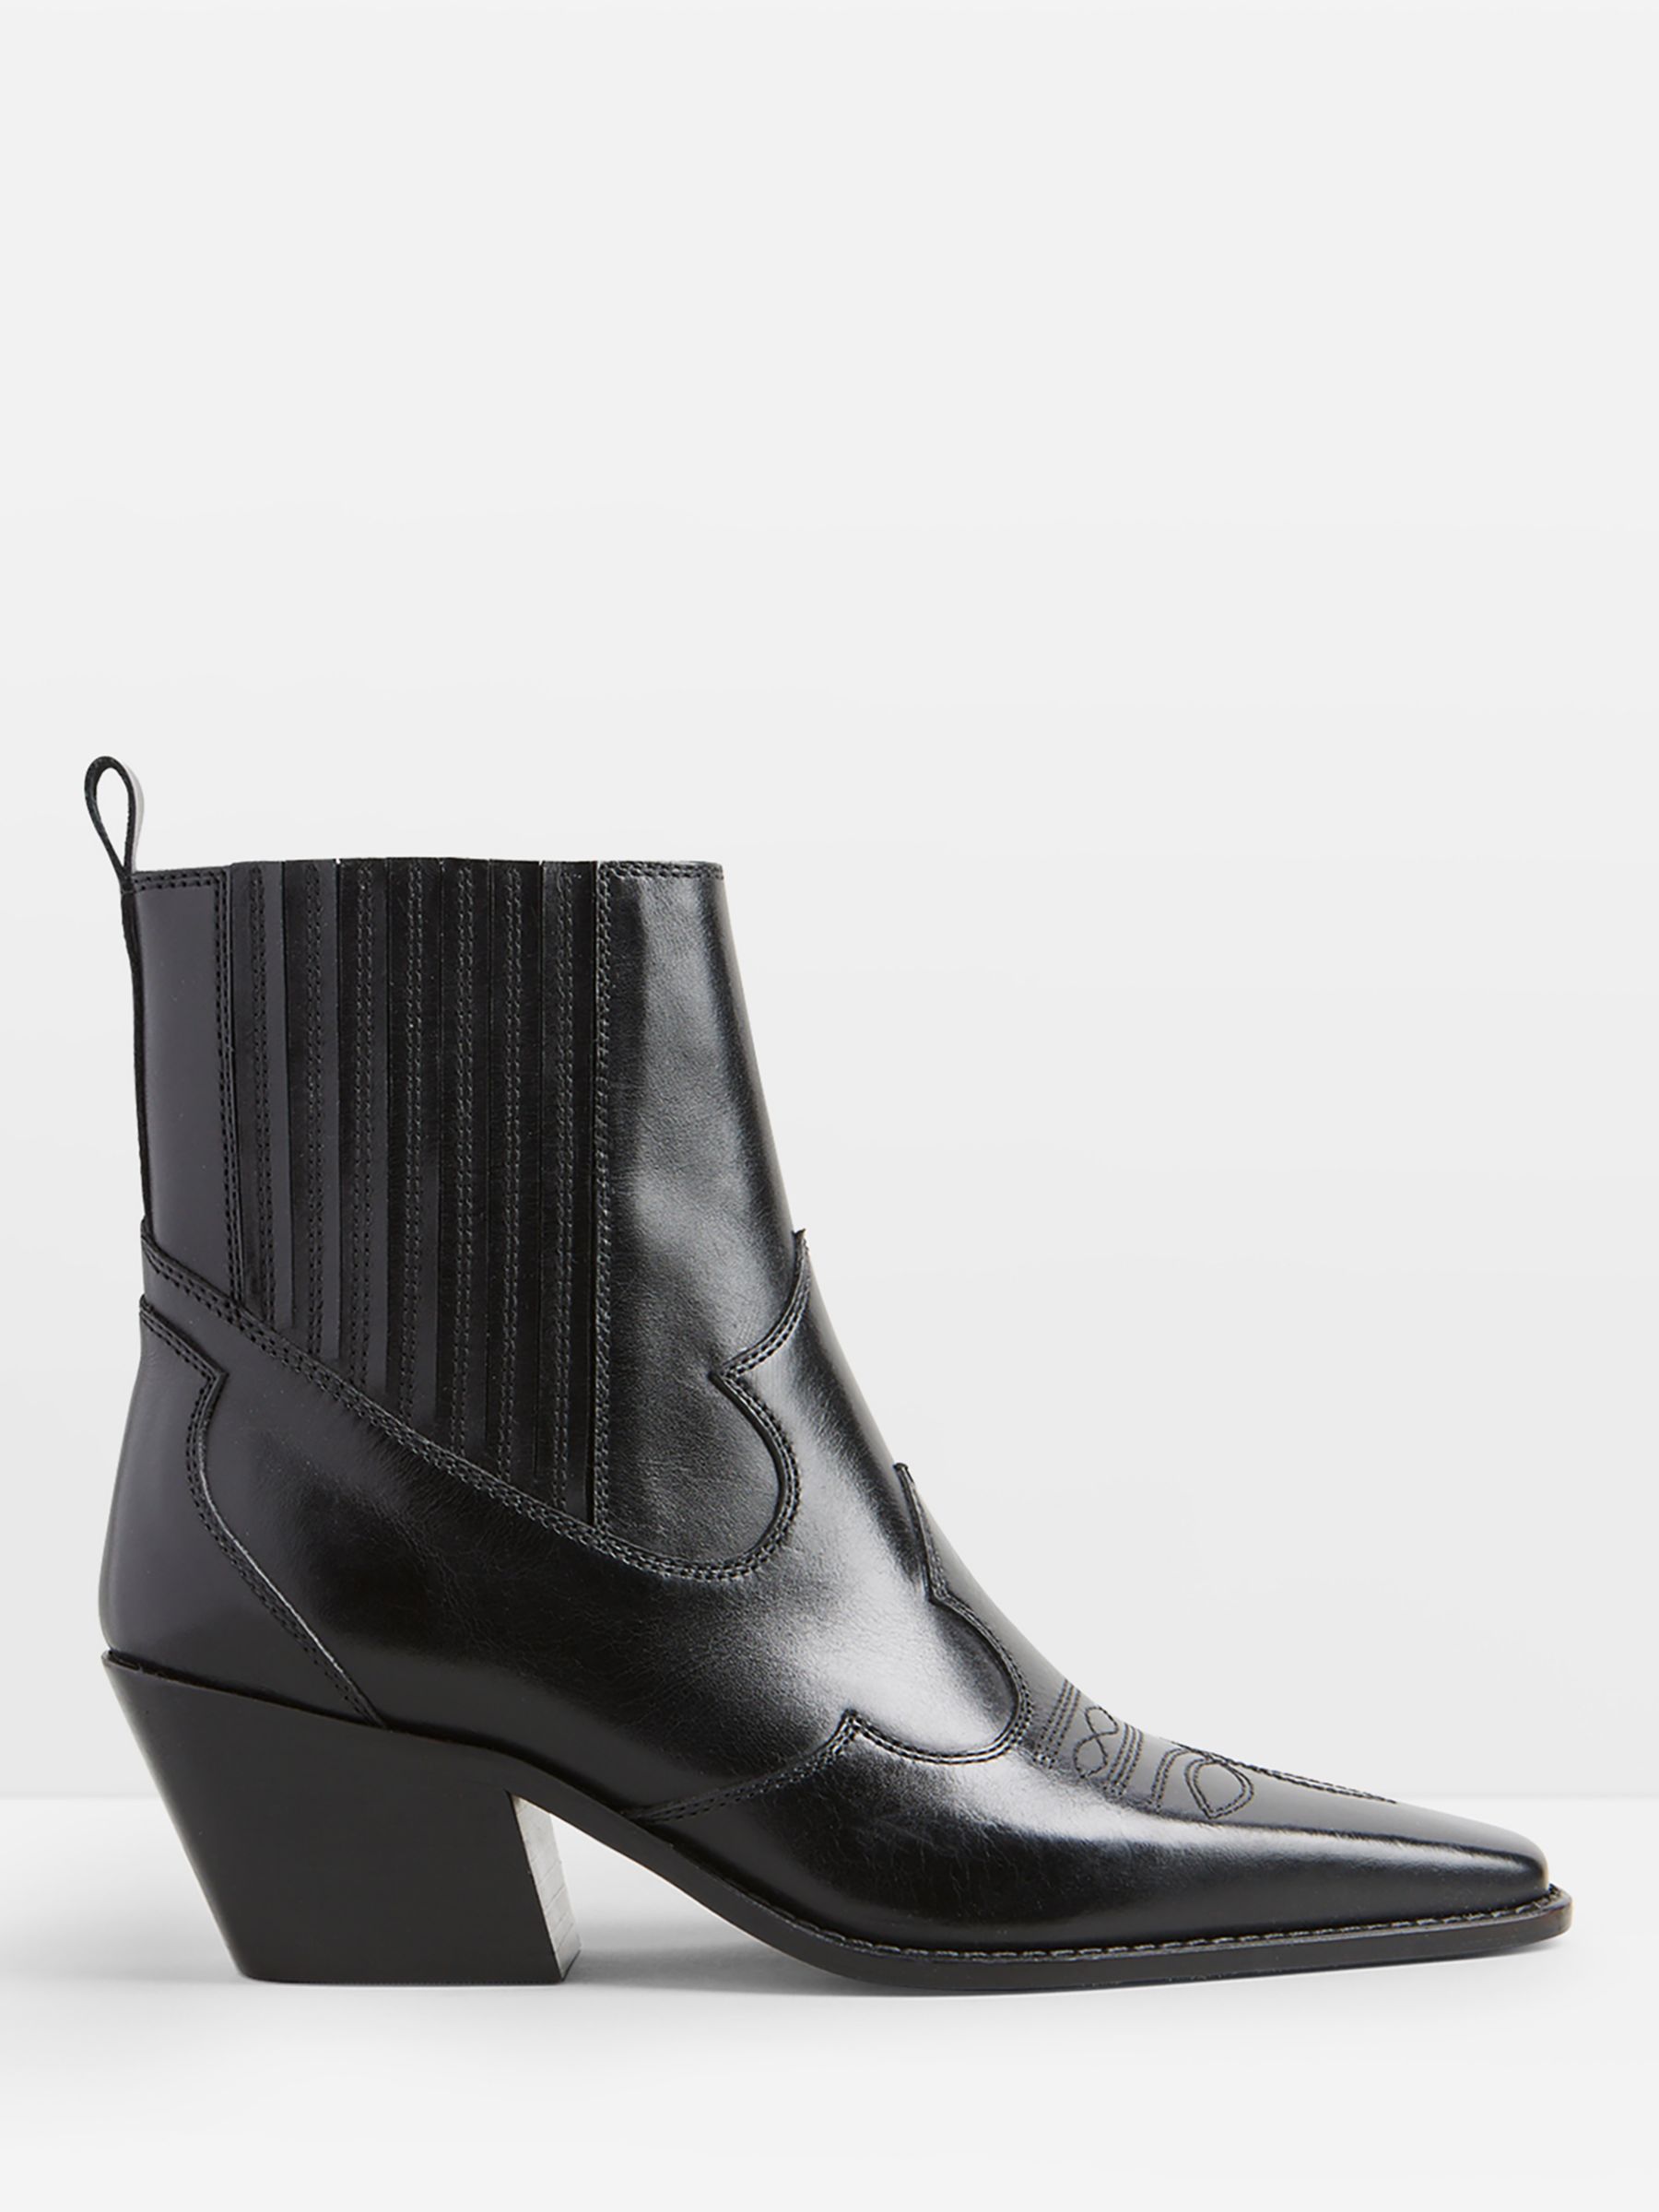 HUSH Kendall Western Leather Boots, Black at John Lewis & Partners